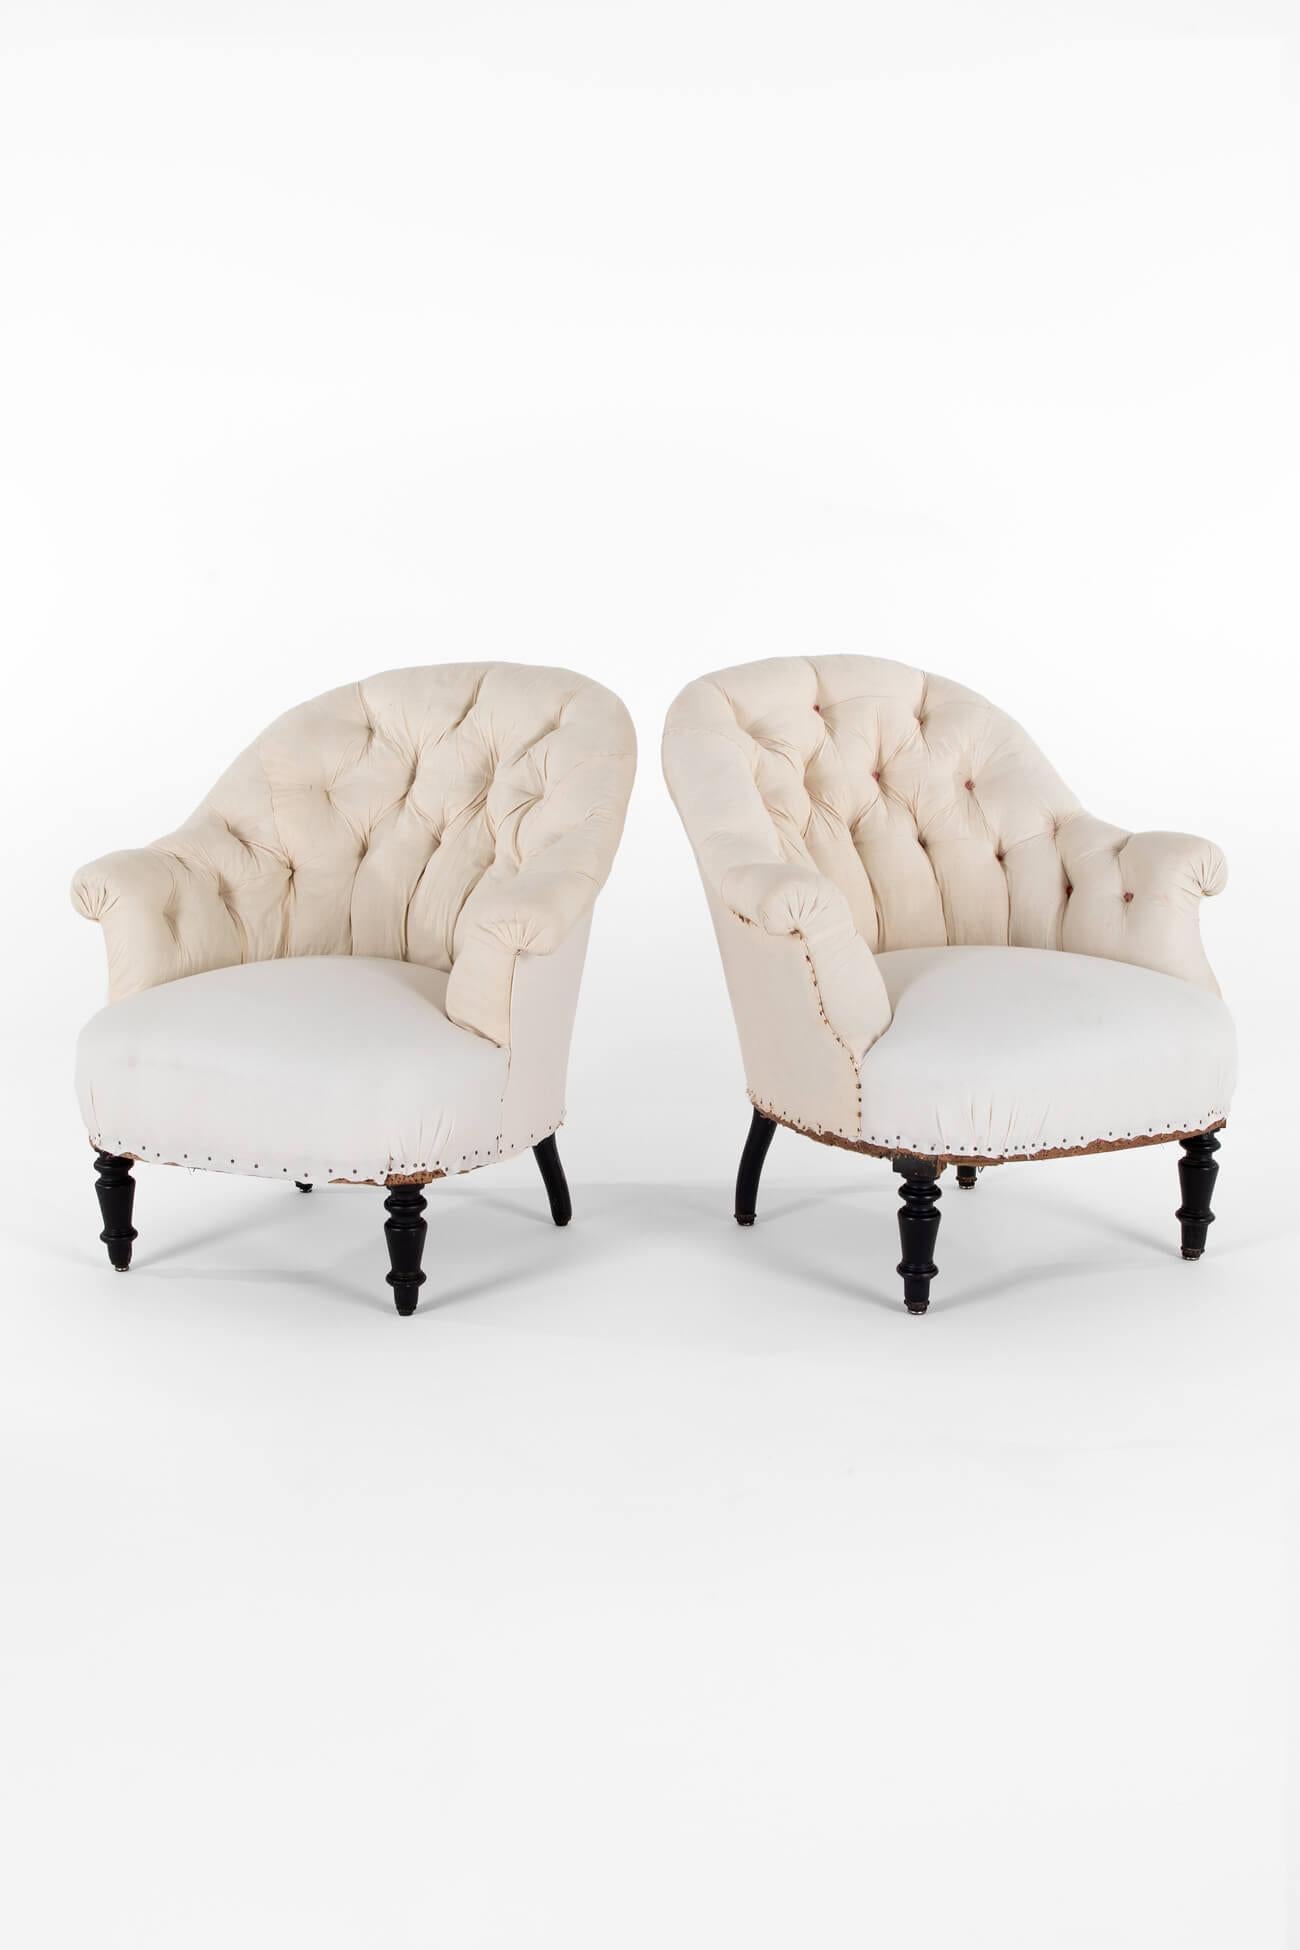 A pretty pair of French button-back armchairs in calico.

The chair’s seats have been fully restored, stripped back to the original solid walnut pegged frame with a new coil spring base, padding, hessian lining, and calico coverings added to the